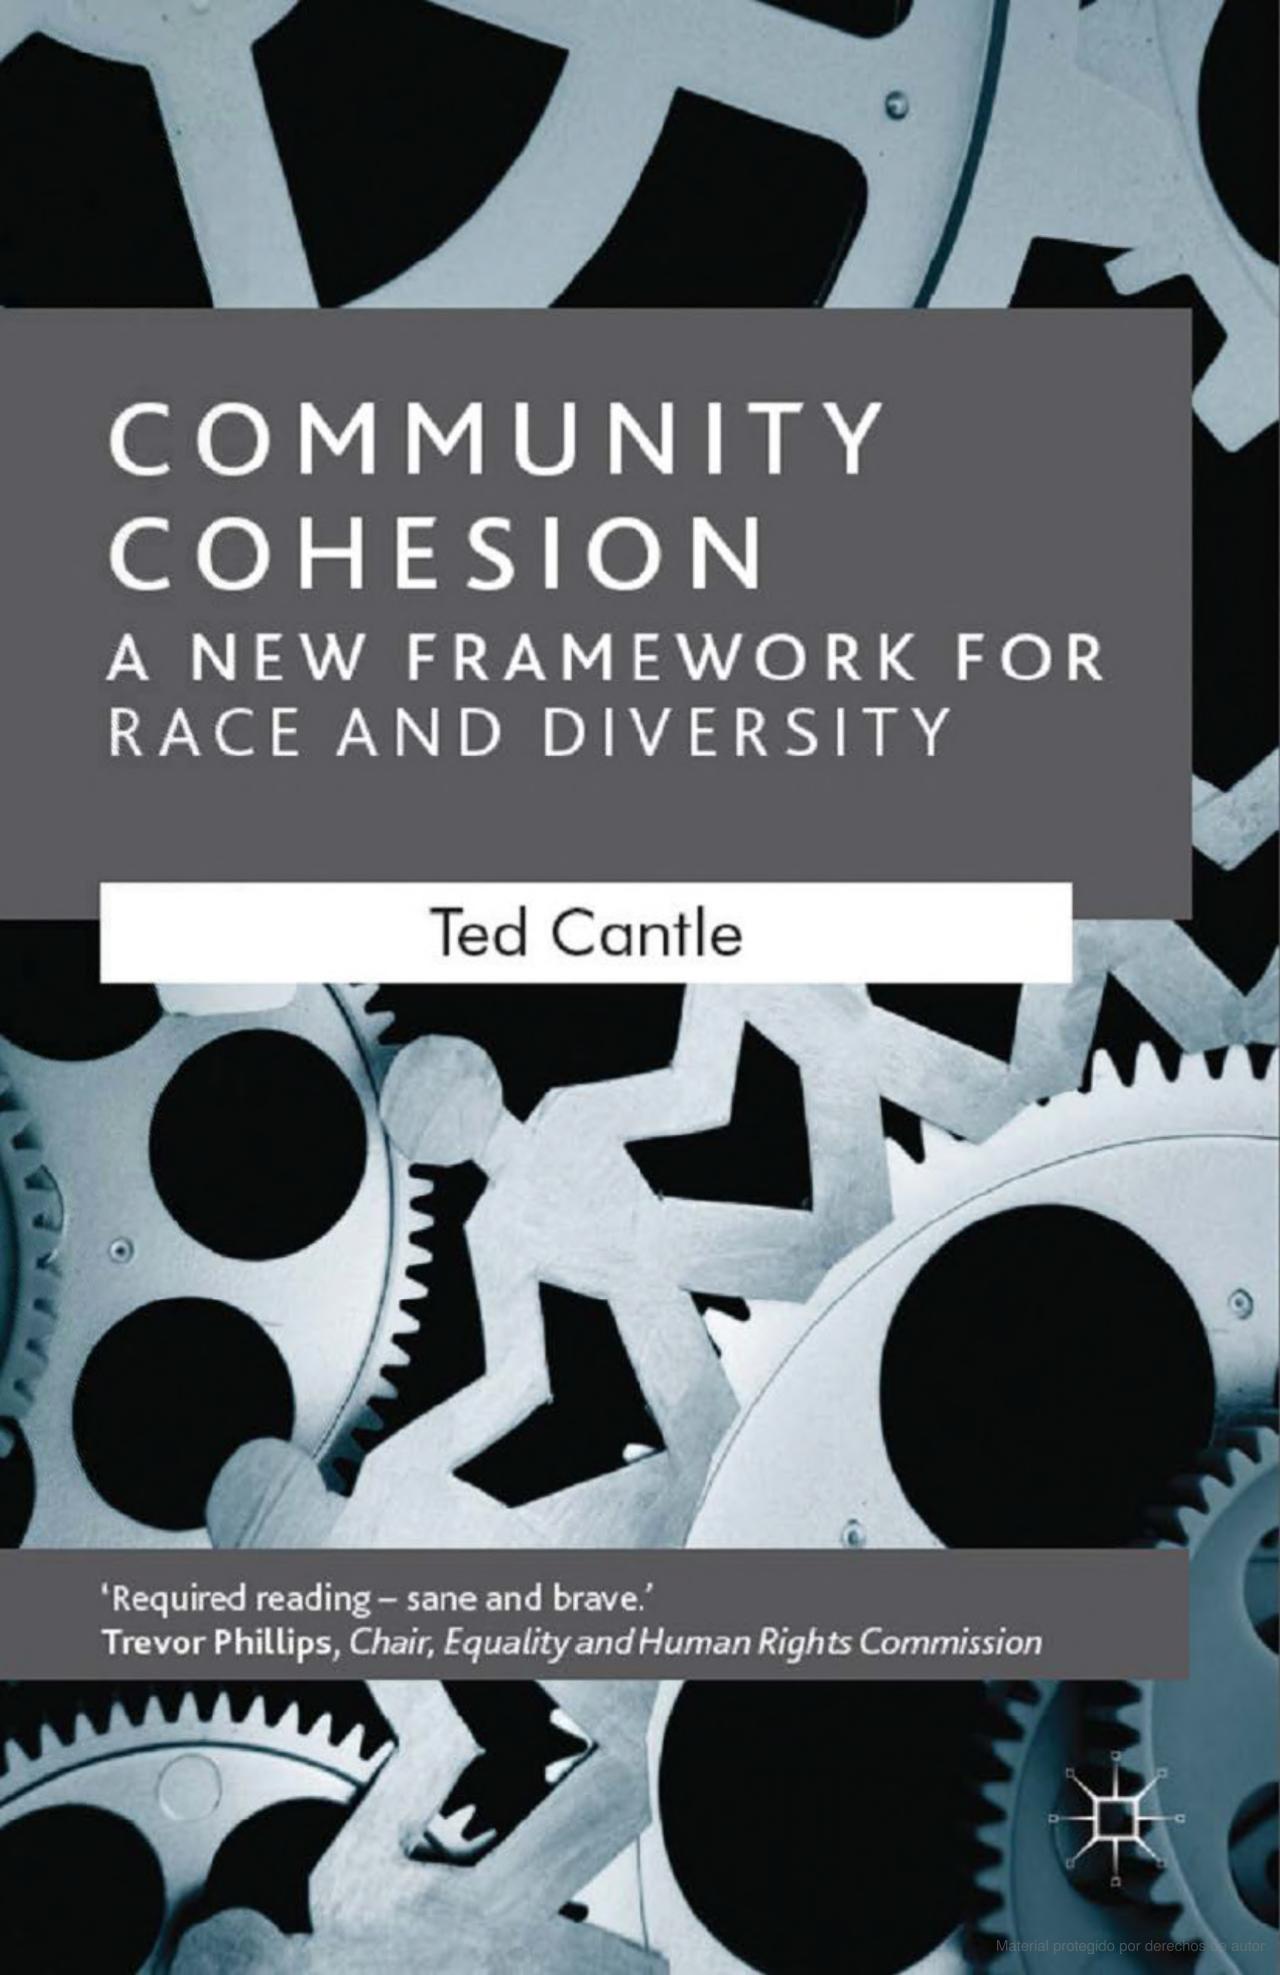 Ted Cantle's Book 'Community Cohesion: A New Framework for Race and Diversity' 2005/2008 established the academic basis for this new approach